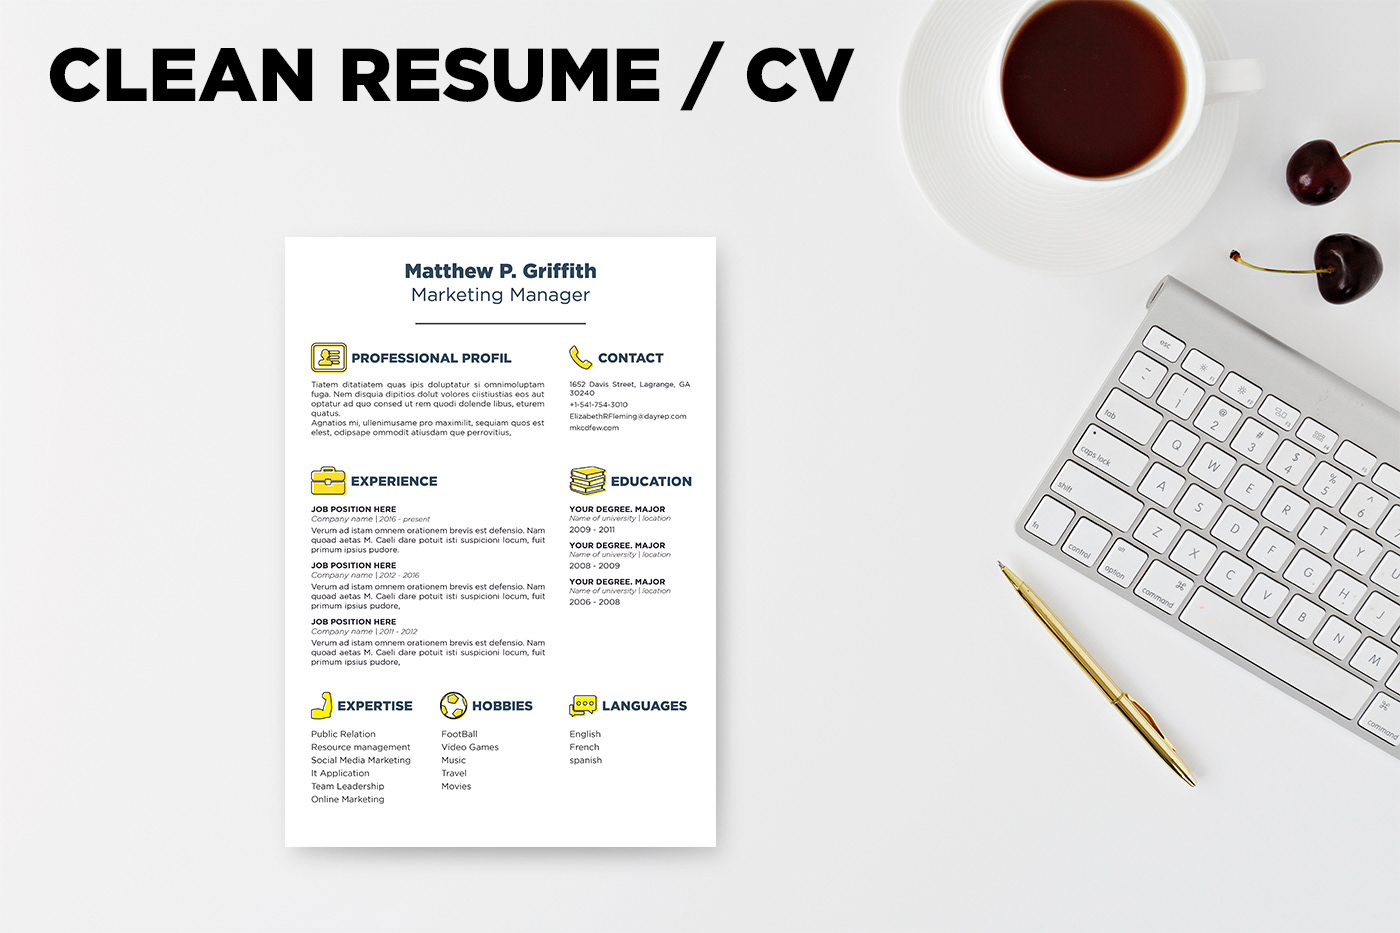 free resume   cv template  u0026 cover letter in word   psd  indd  u0026 ai for marketing managers